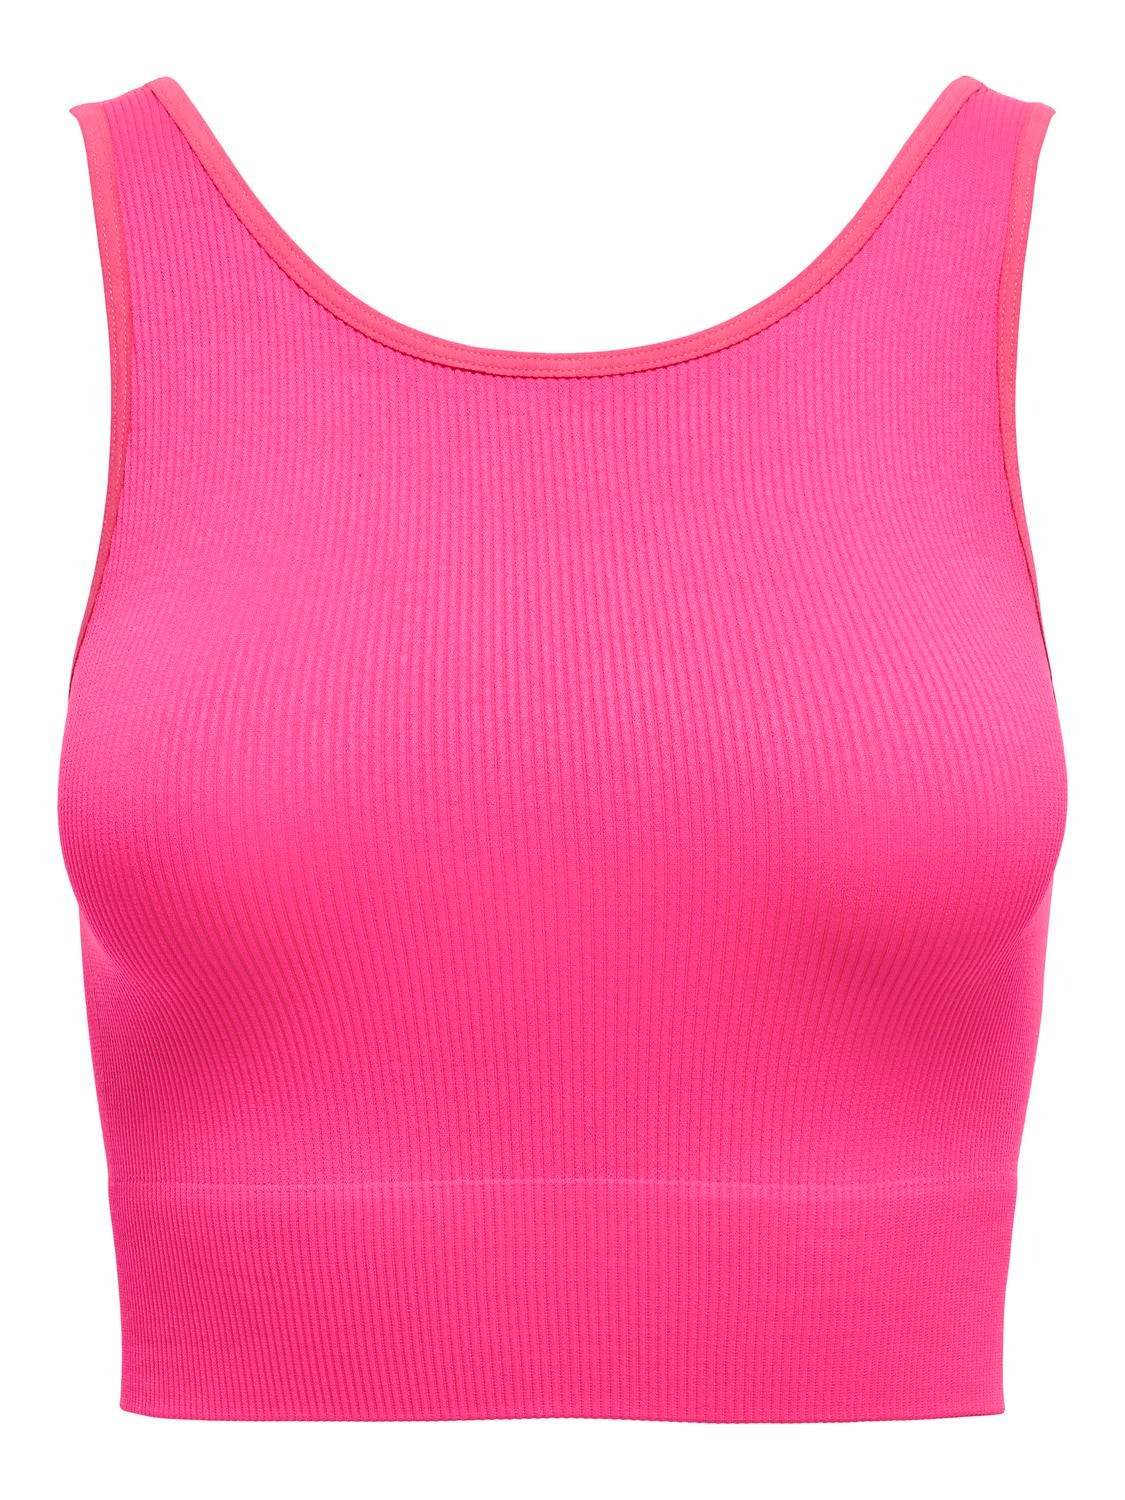 ONLY Slim Fit U-Neck Top -Pink Glo - 15250051